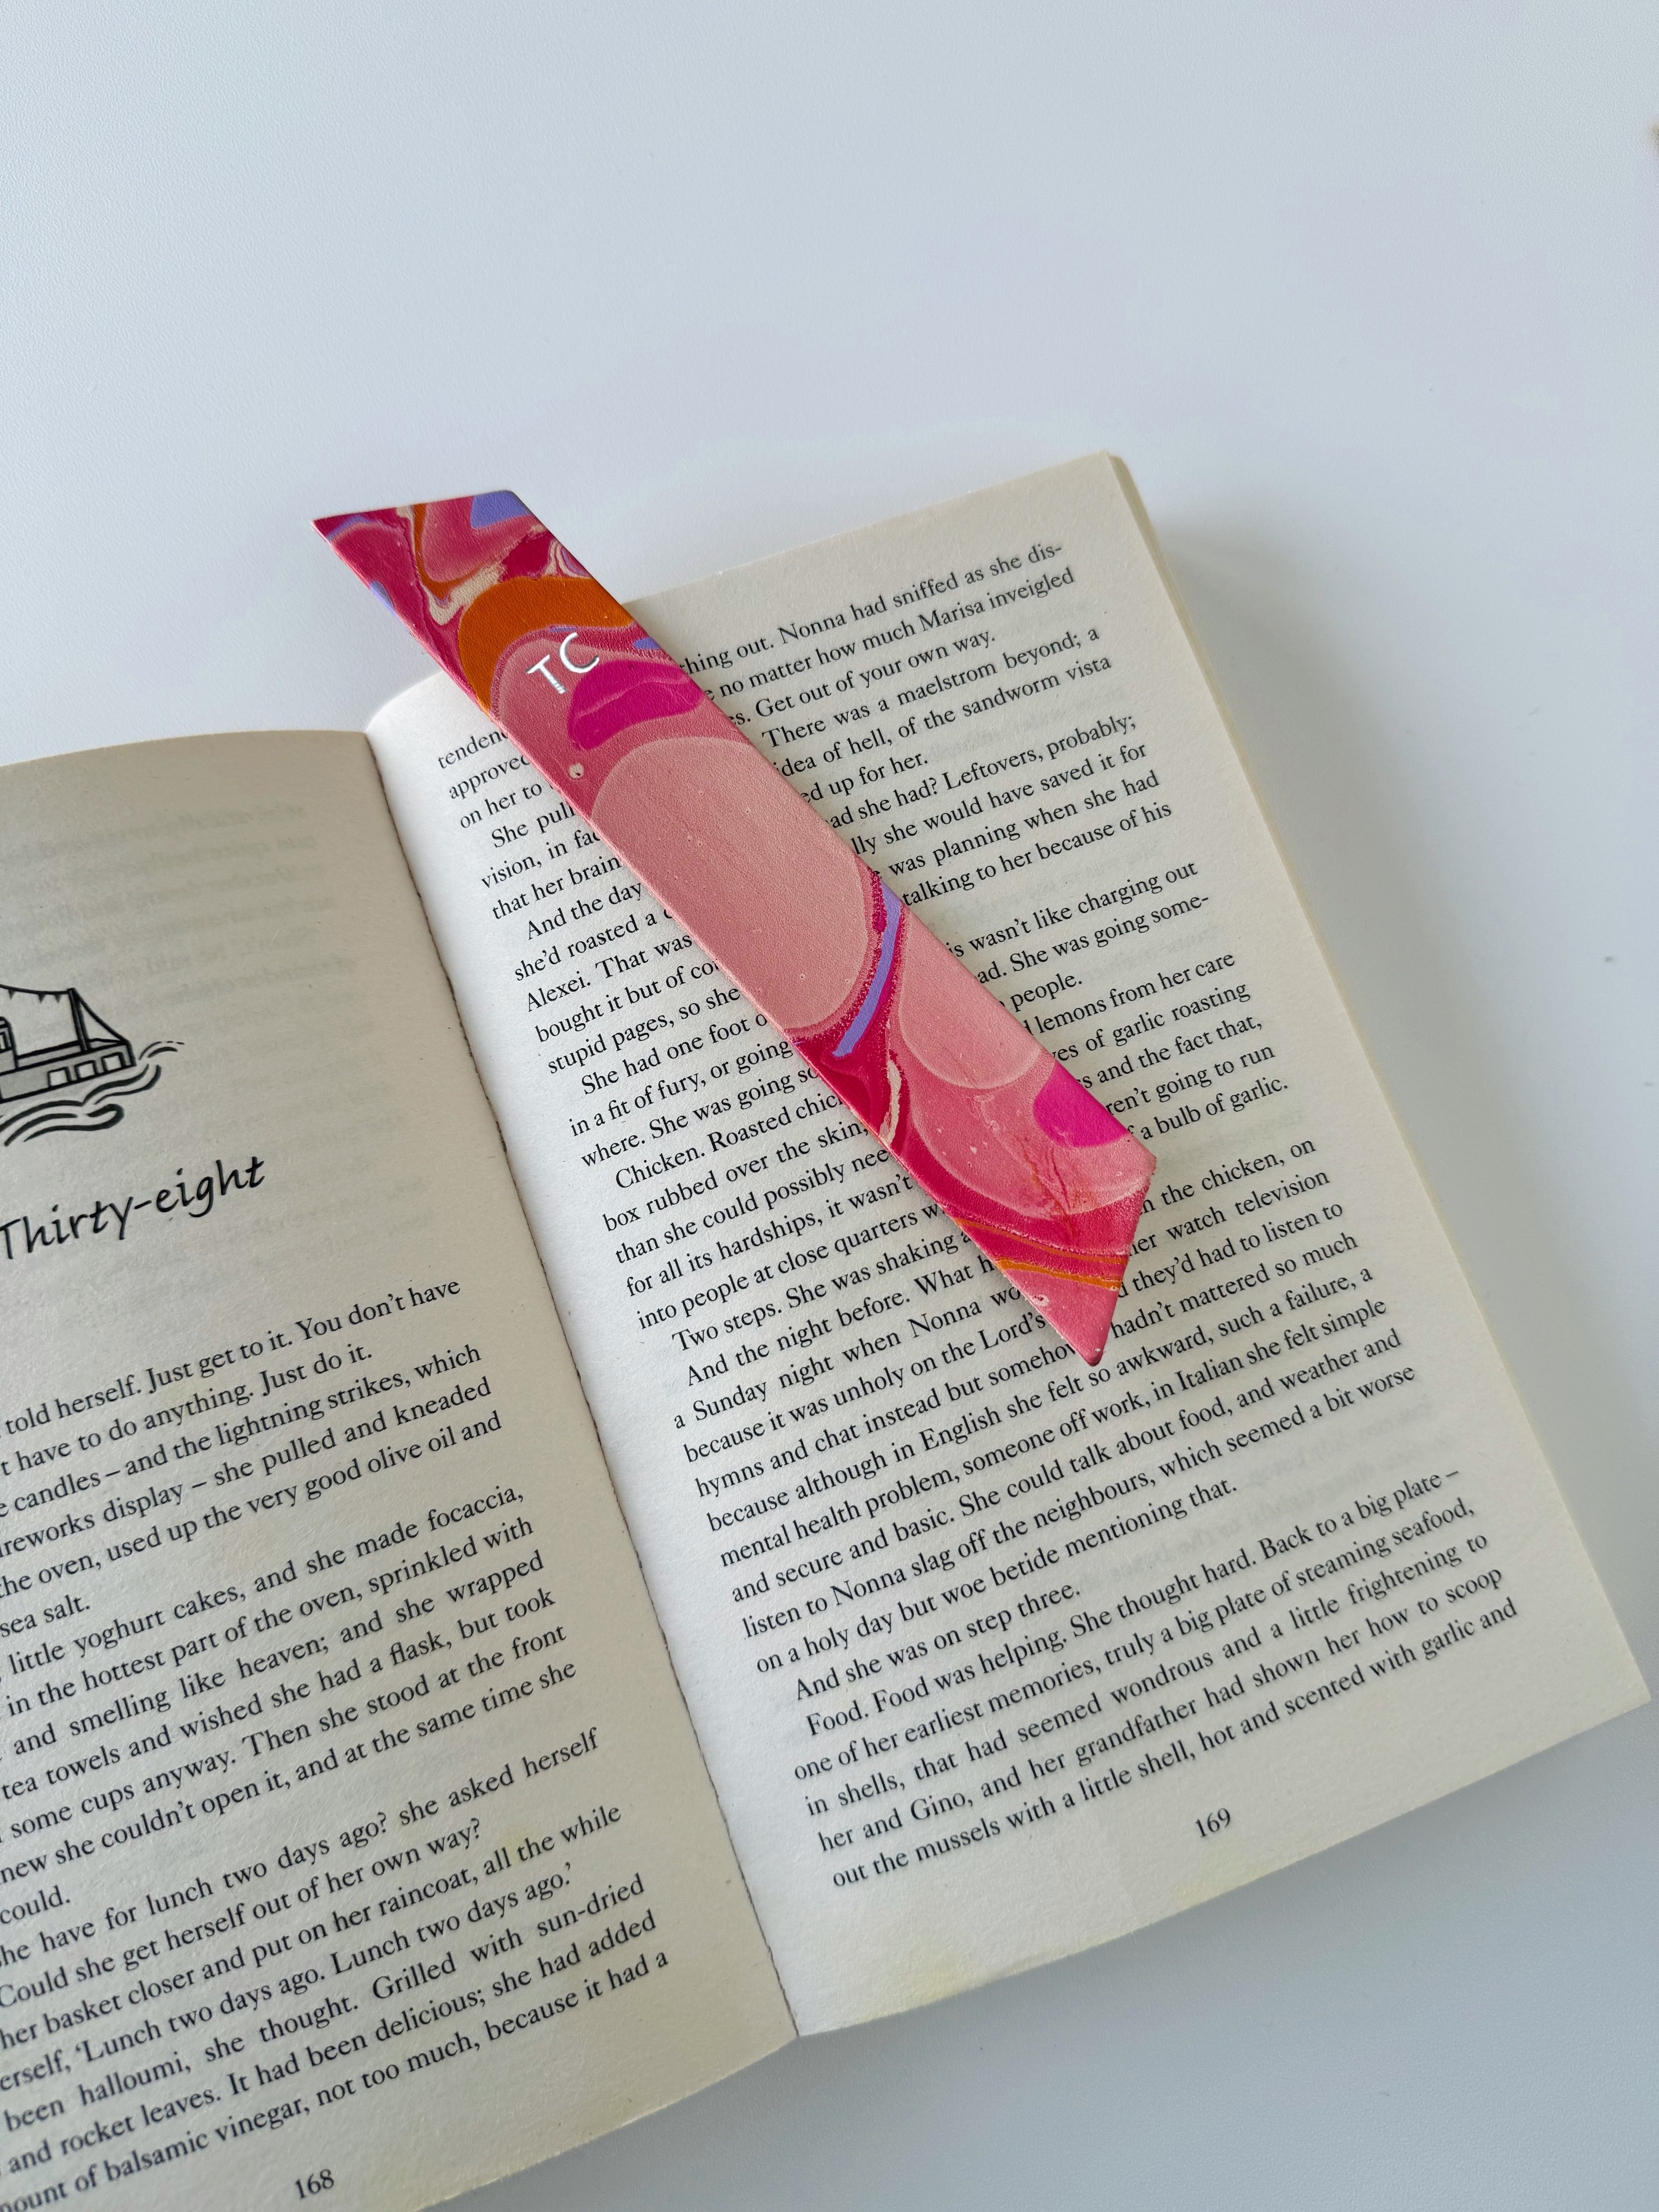 Marbled Bookmarks